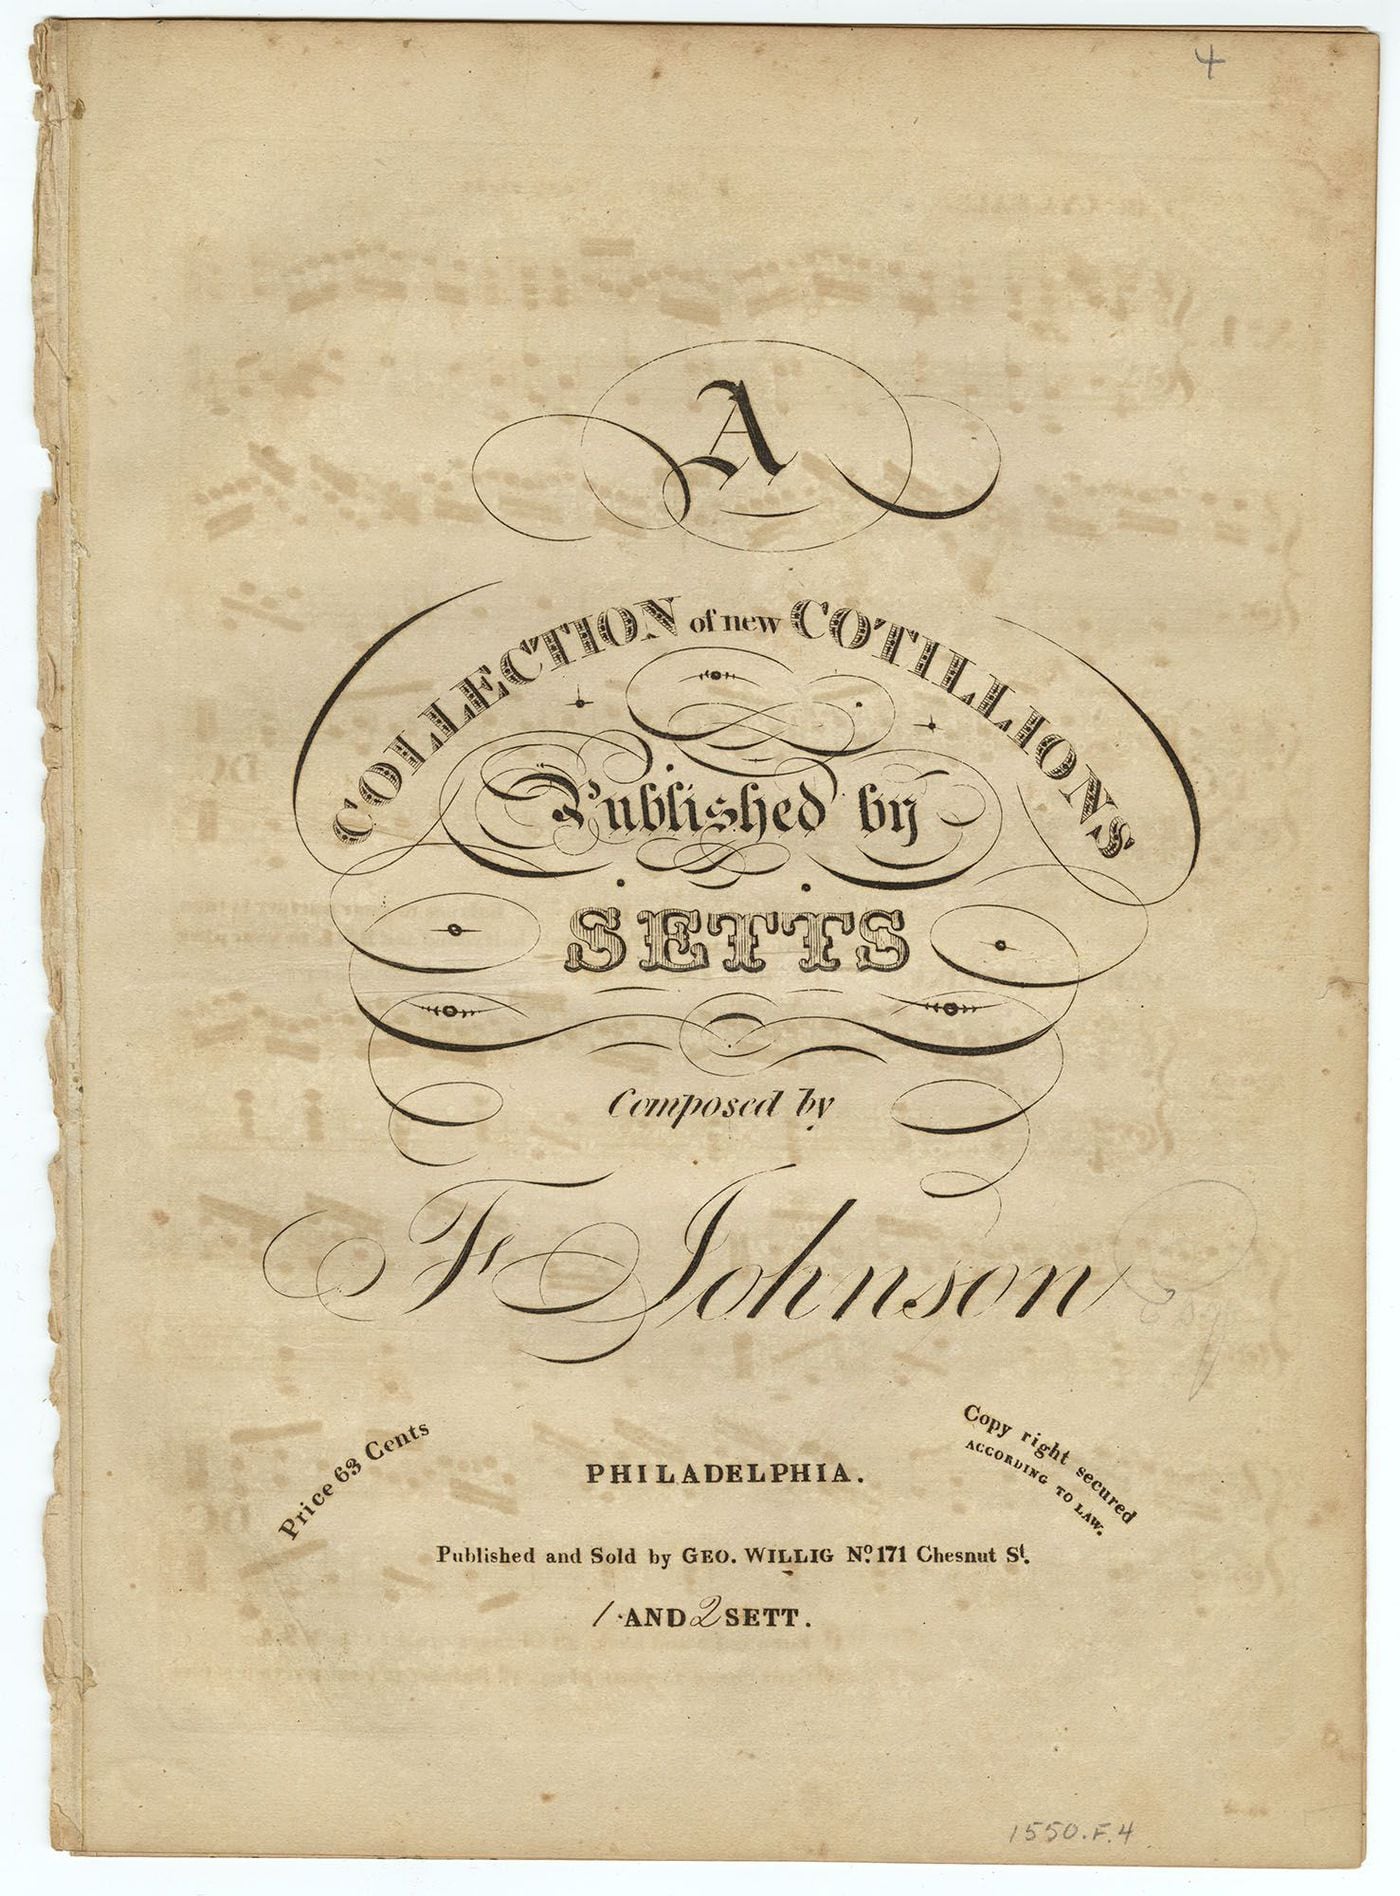 Songsheet from Francis Johnson's "A Collection of New Cotillions"